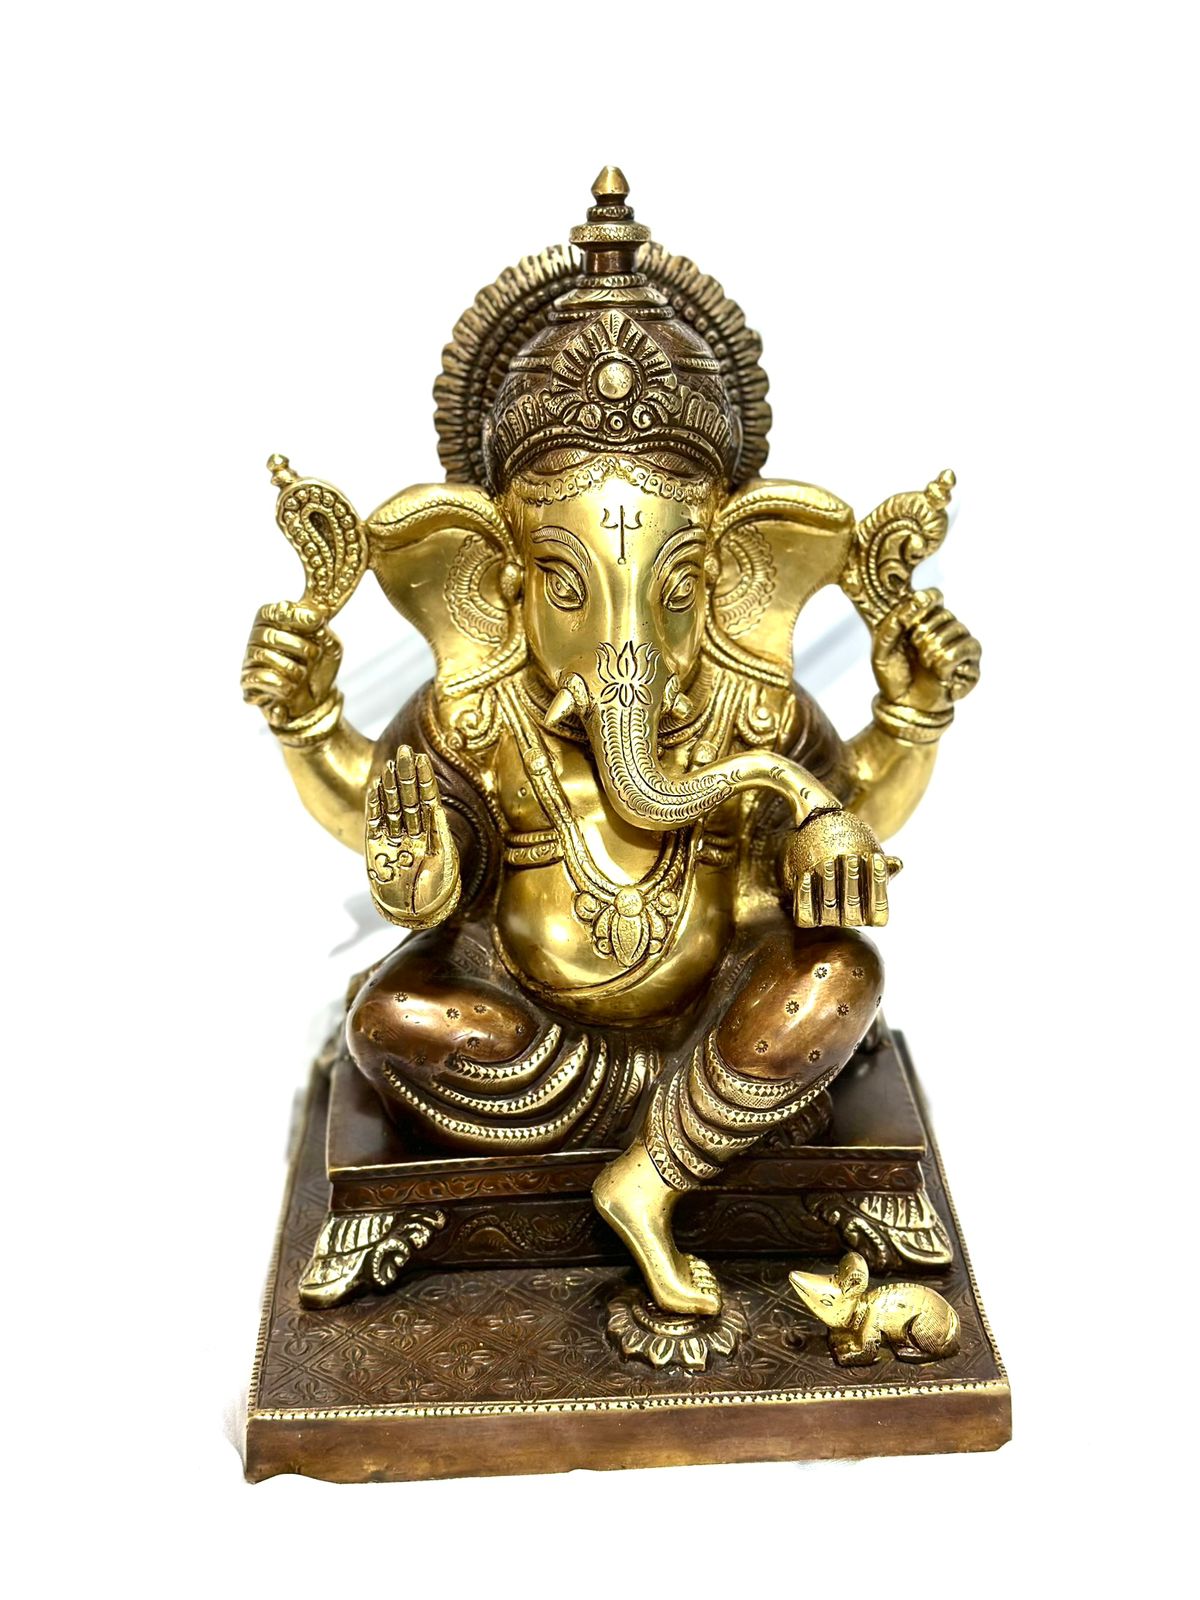 Unique Creation Of Brass In Form Of Ganesha Idol In Exclusive Models By Tamrapatra